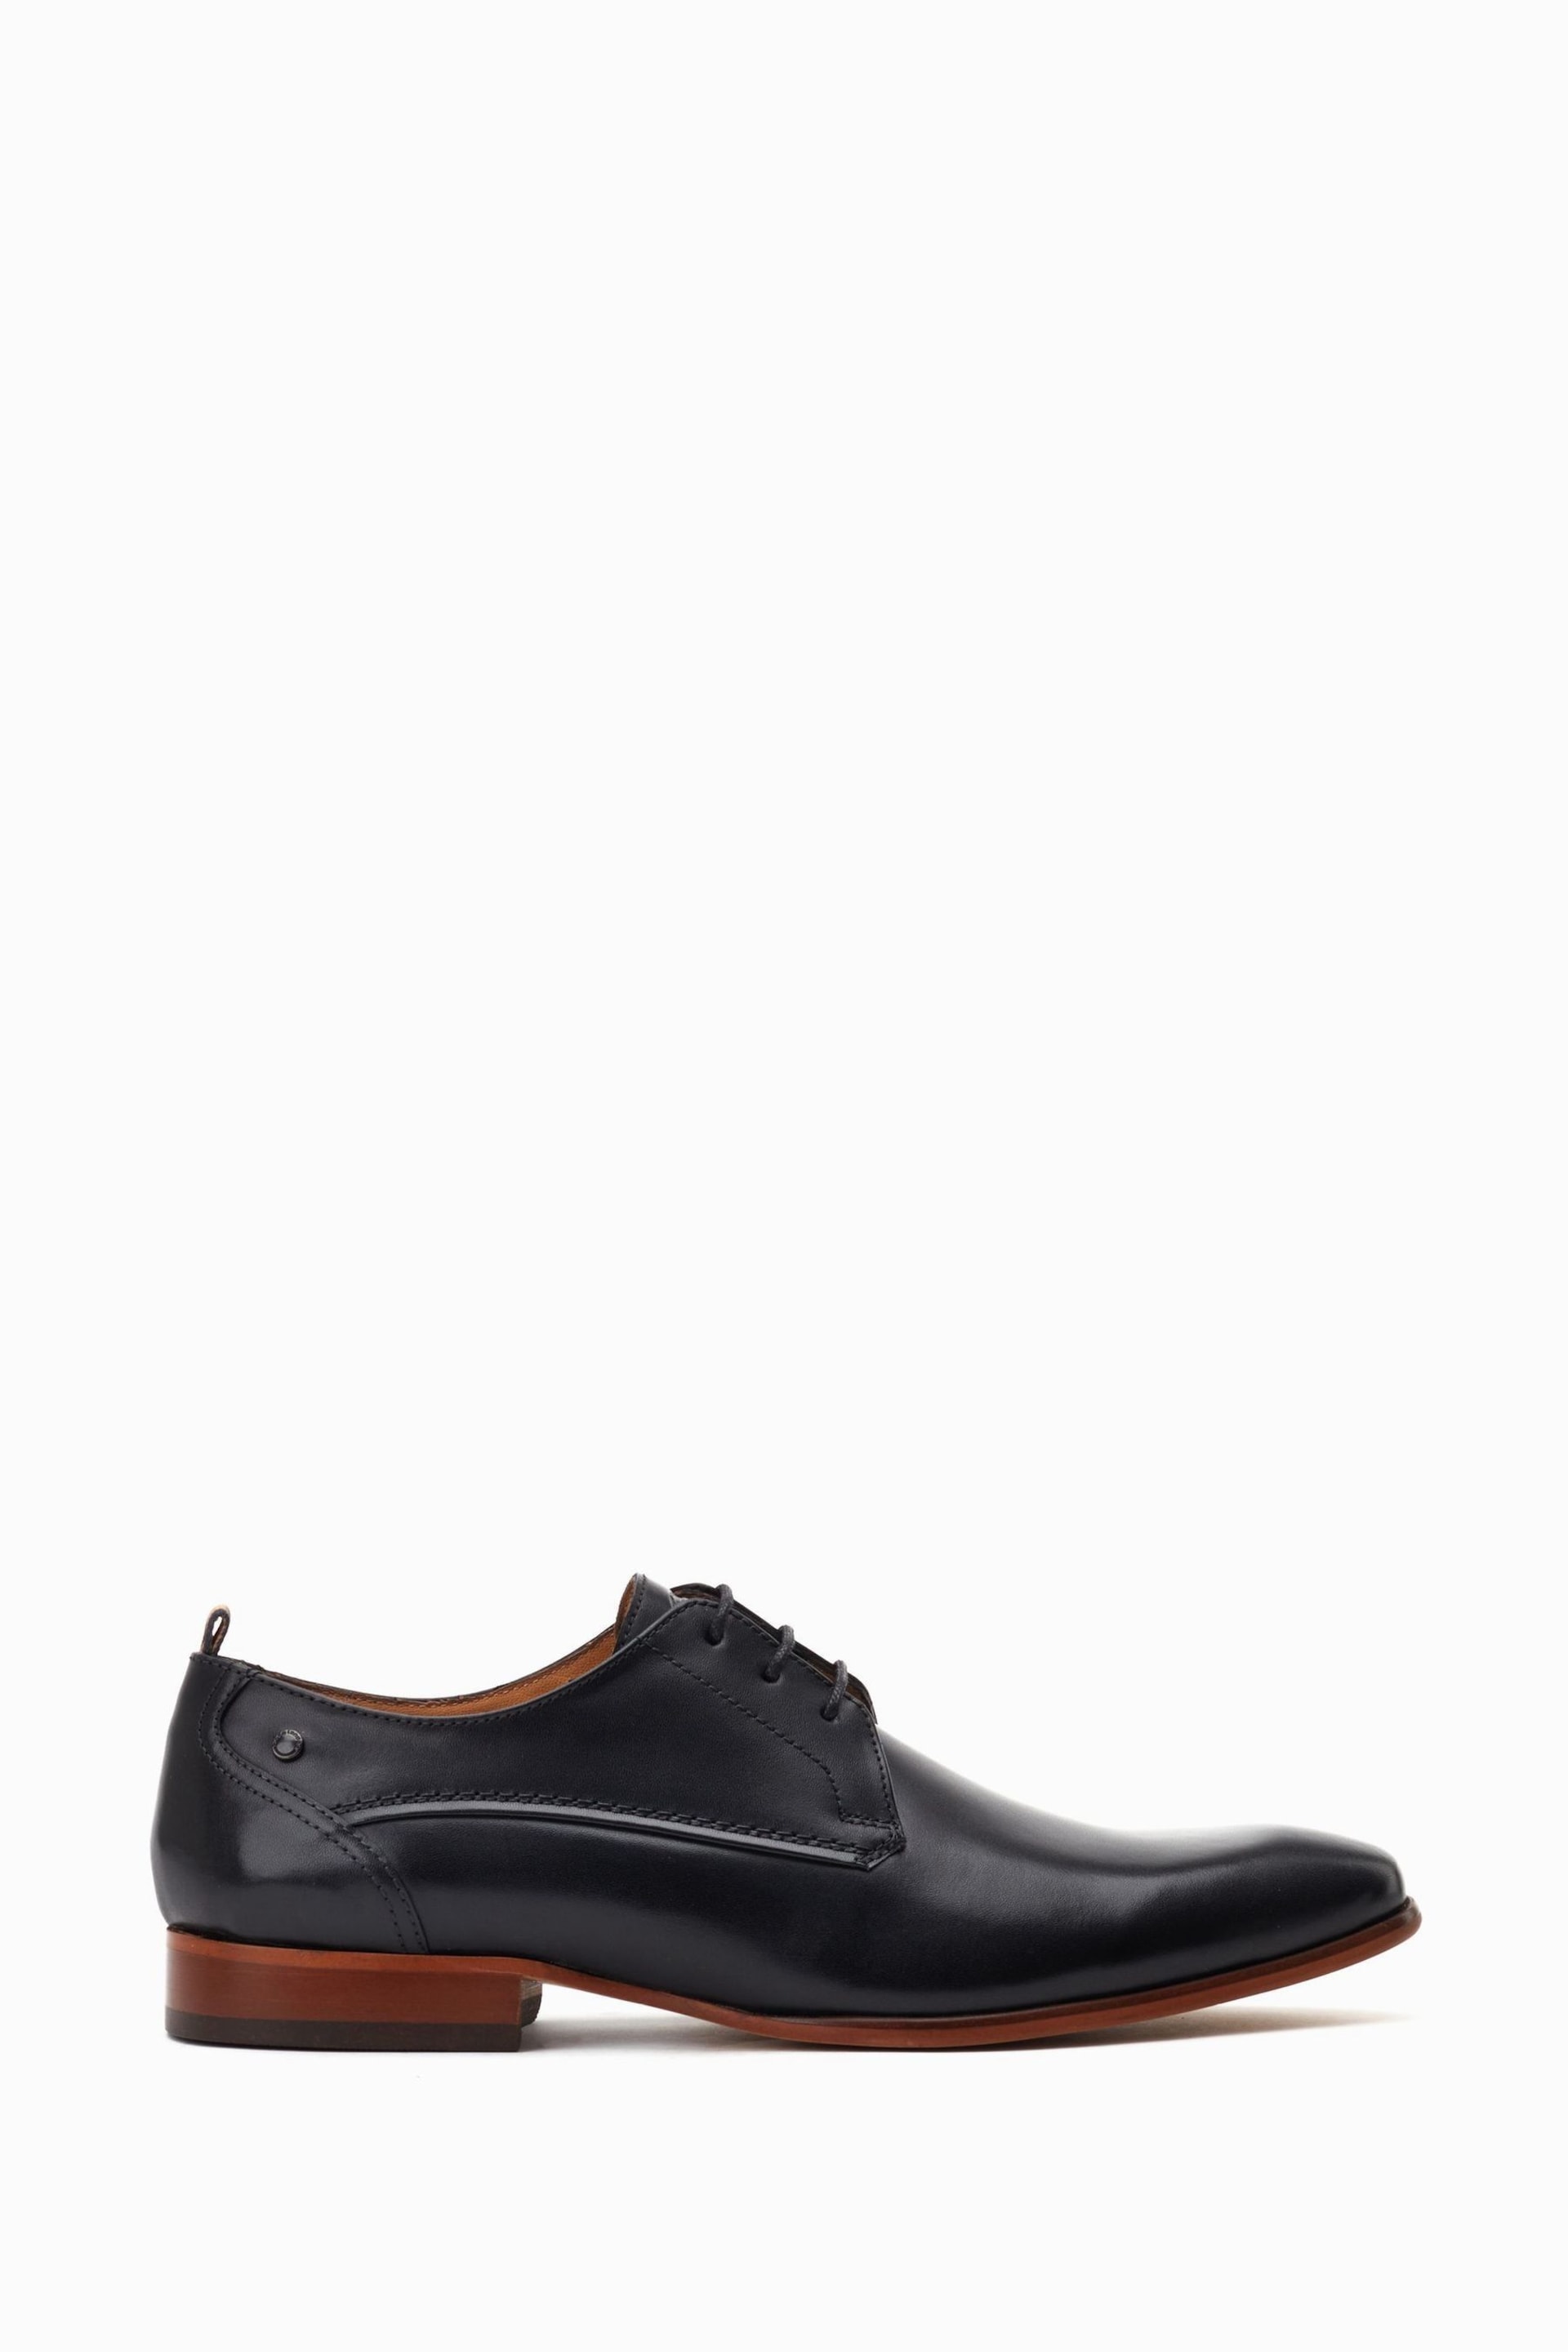 Base London Gambino Lace-Up Derby Shoes - Image 1 of 6